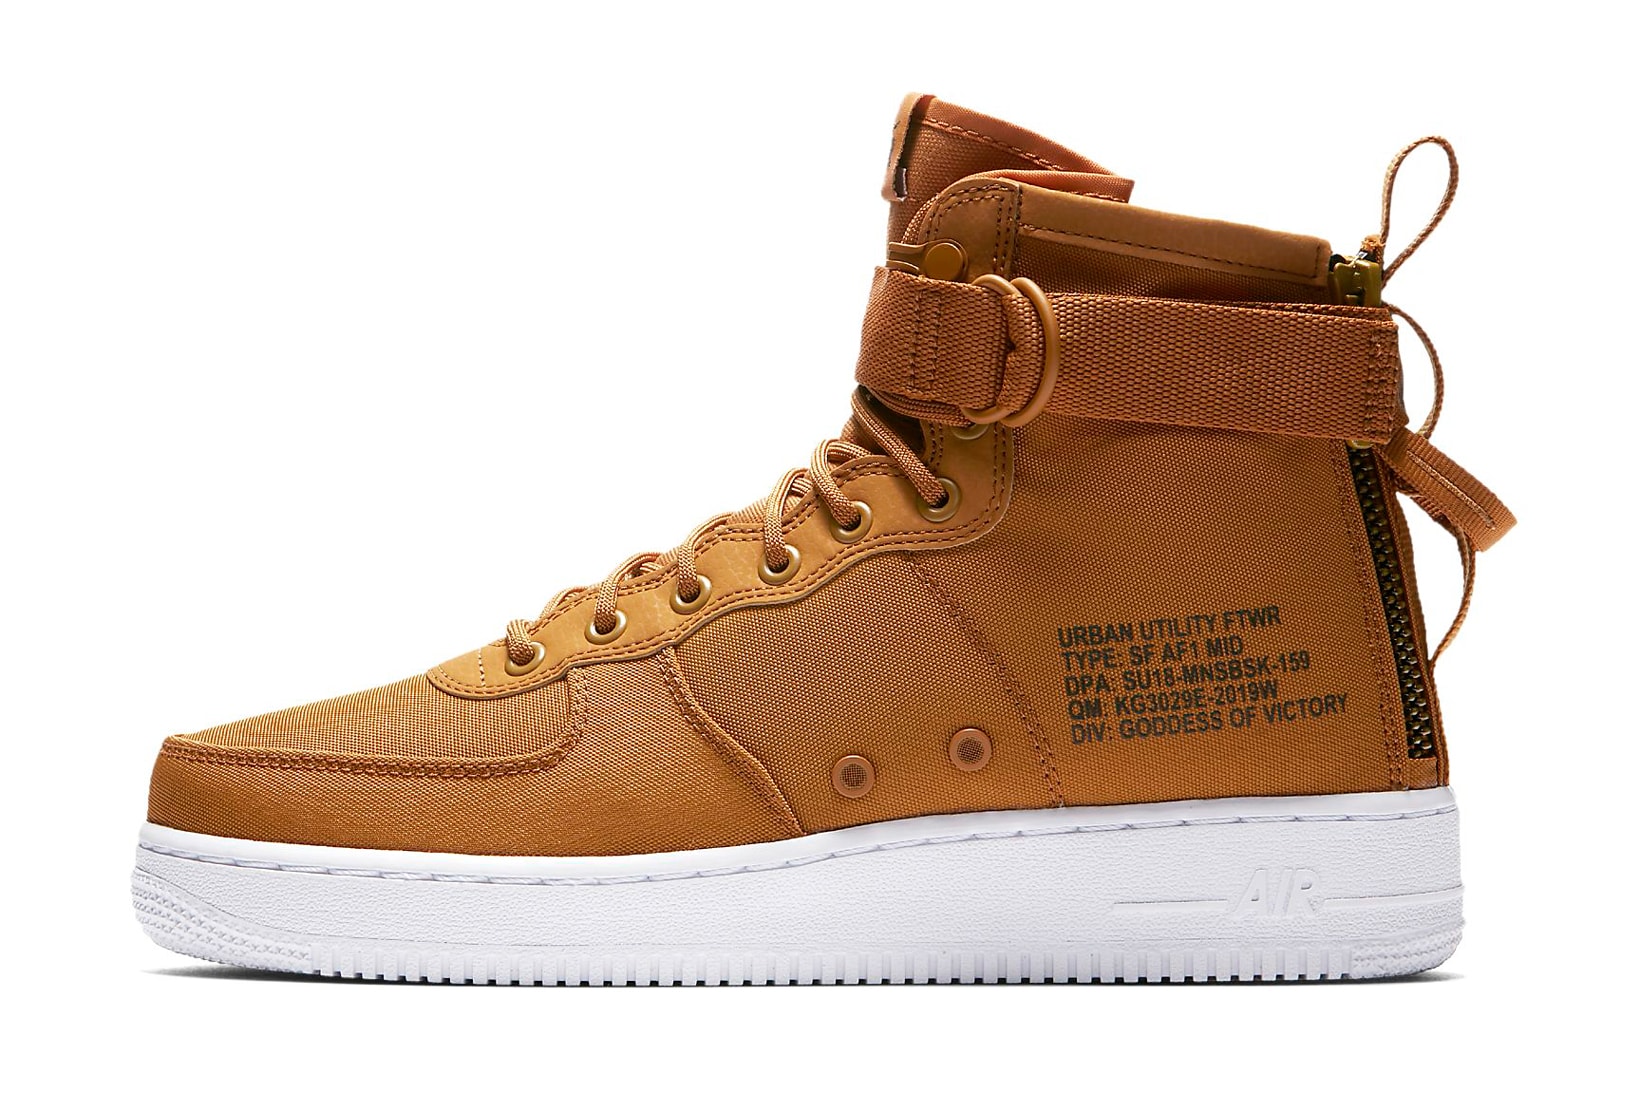 Nike SF AF1 Mid Desert Ocre Yellow Mustard Timberland Release Info Date Drops Air Force 1